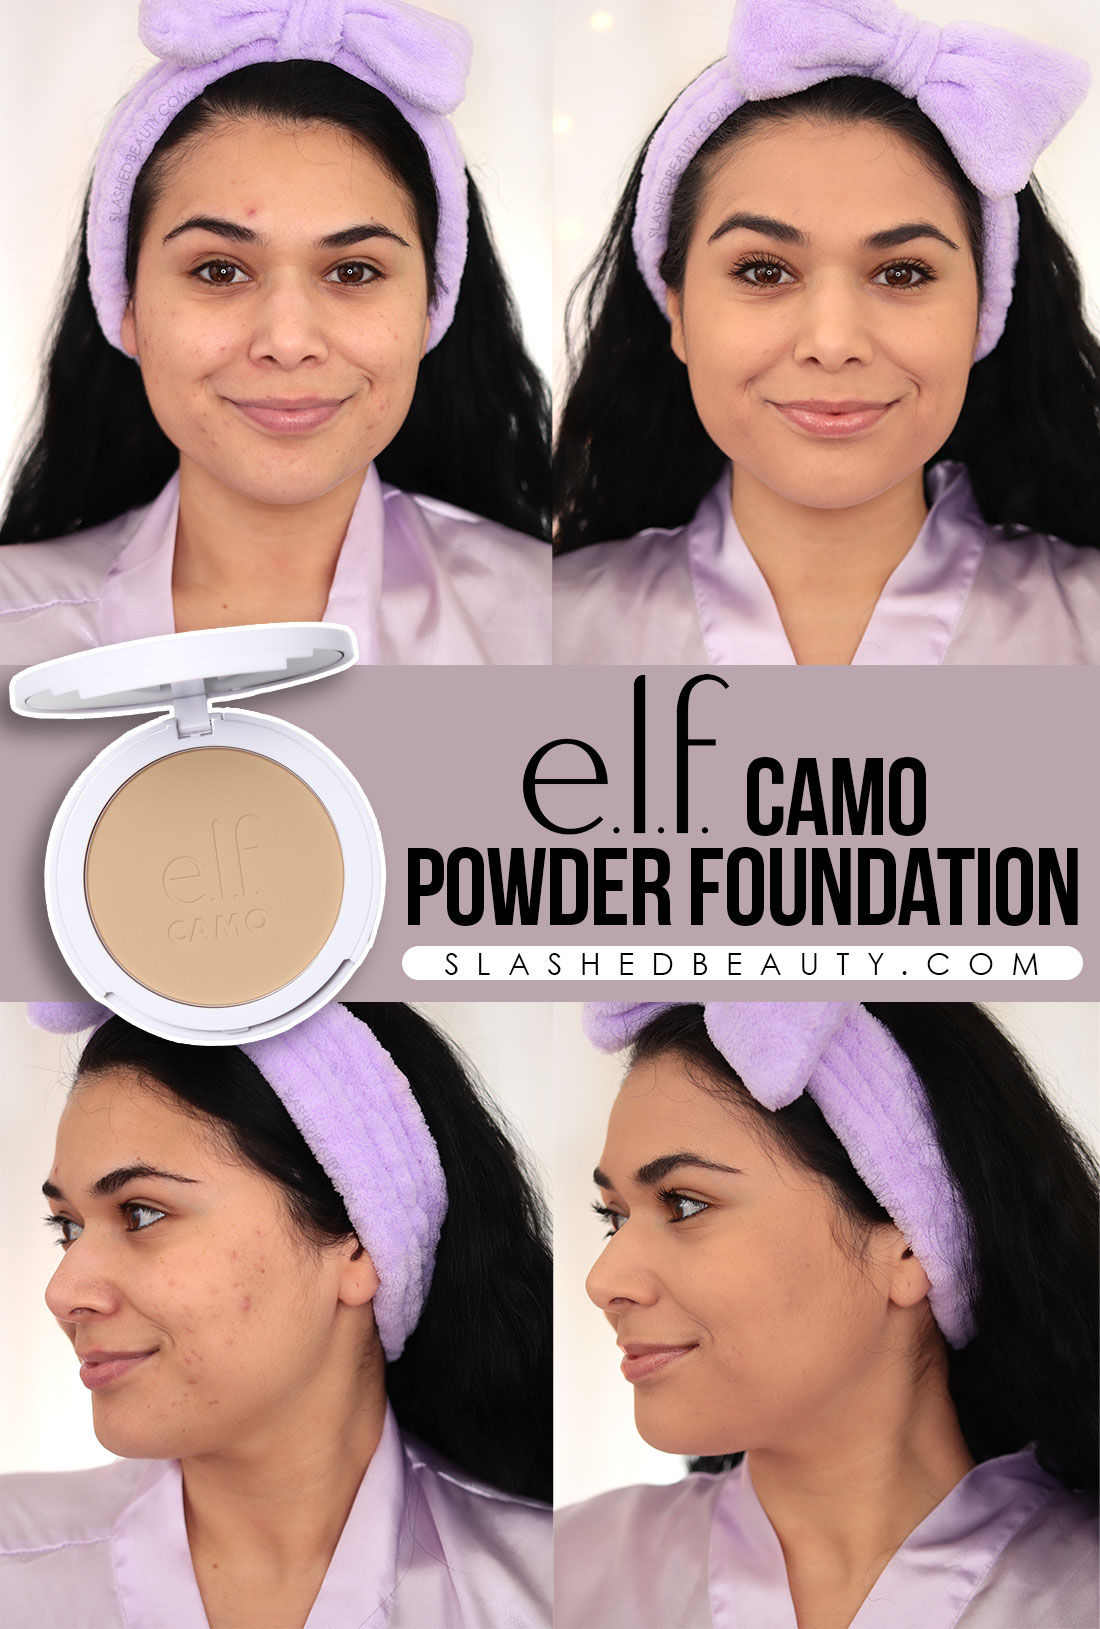 Before and after applying e.l.f. Camo Powder Foundation over acne, showing medium to full coverage | elf Camo Powder Foundation Review | Slashed Beauty